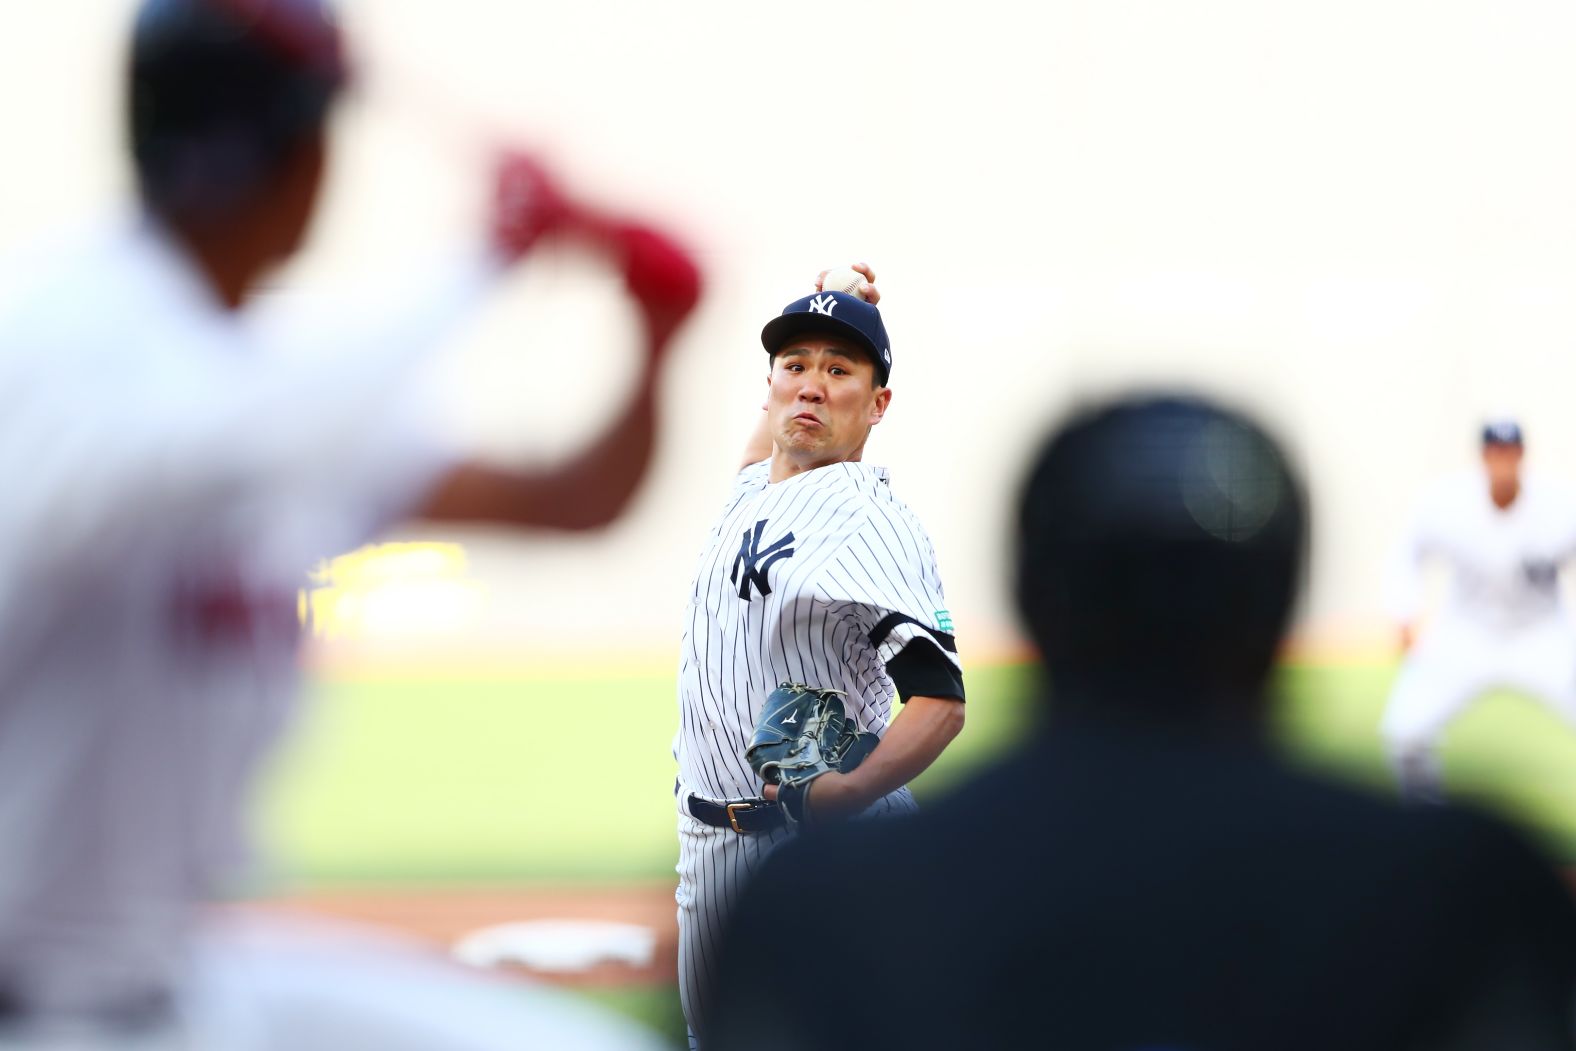 Masahiro Tanaka delivers a pitch during game one of the MLB London Series on June 29.